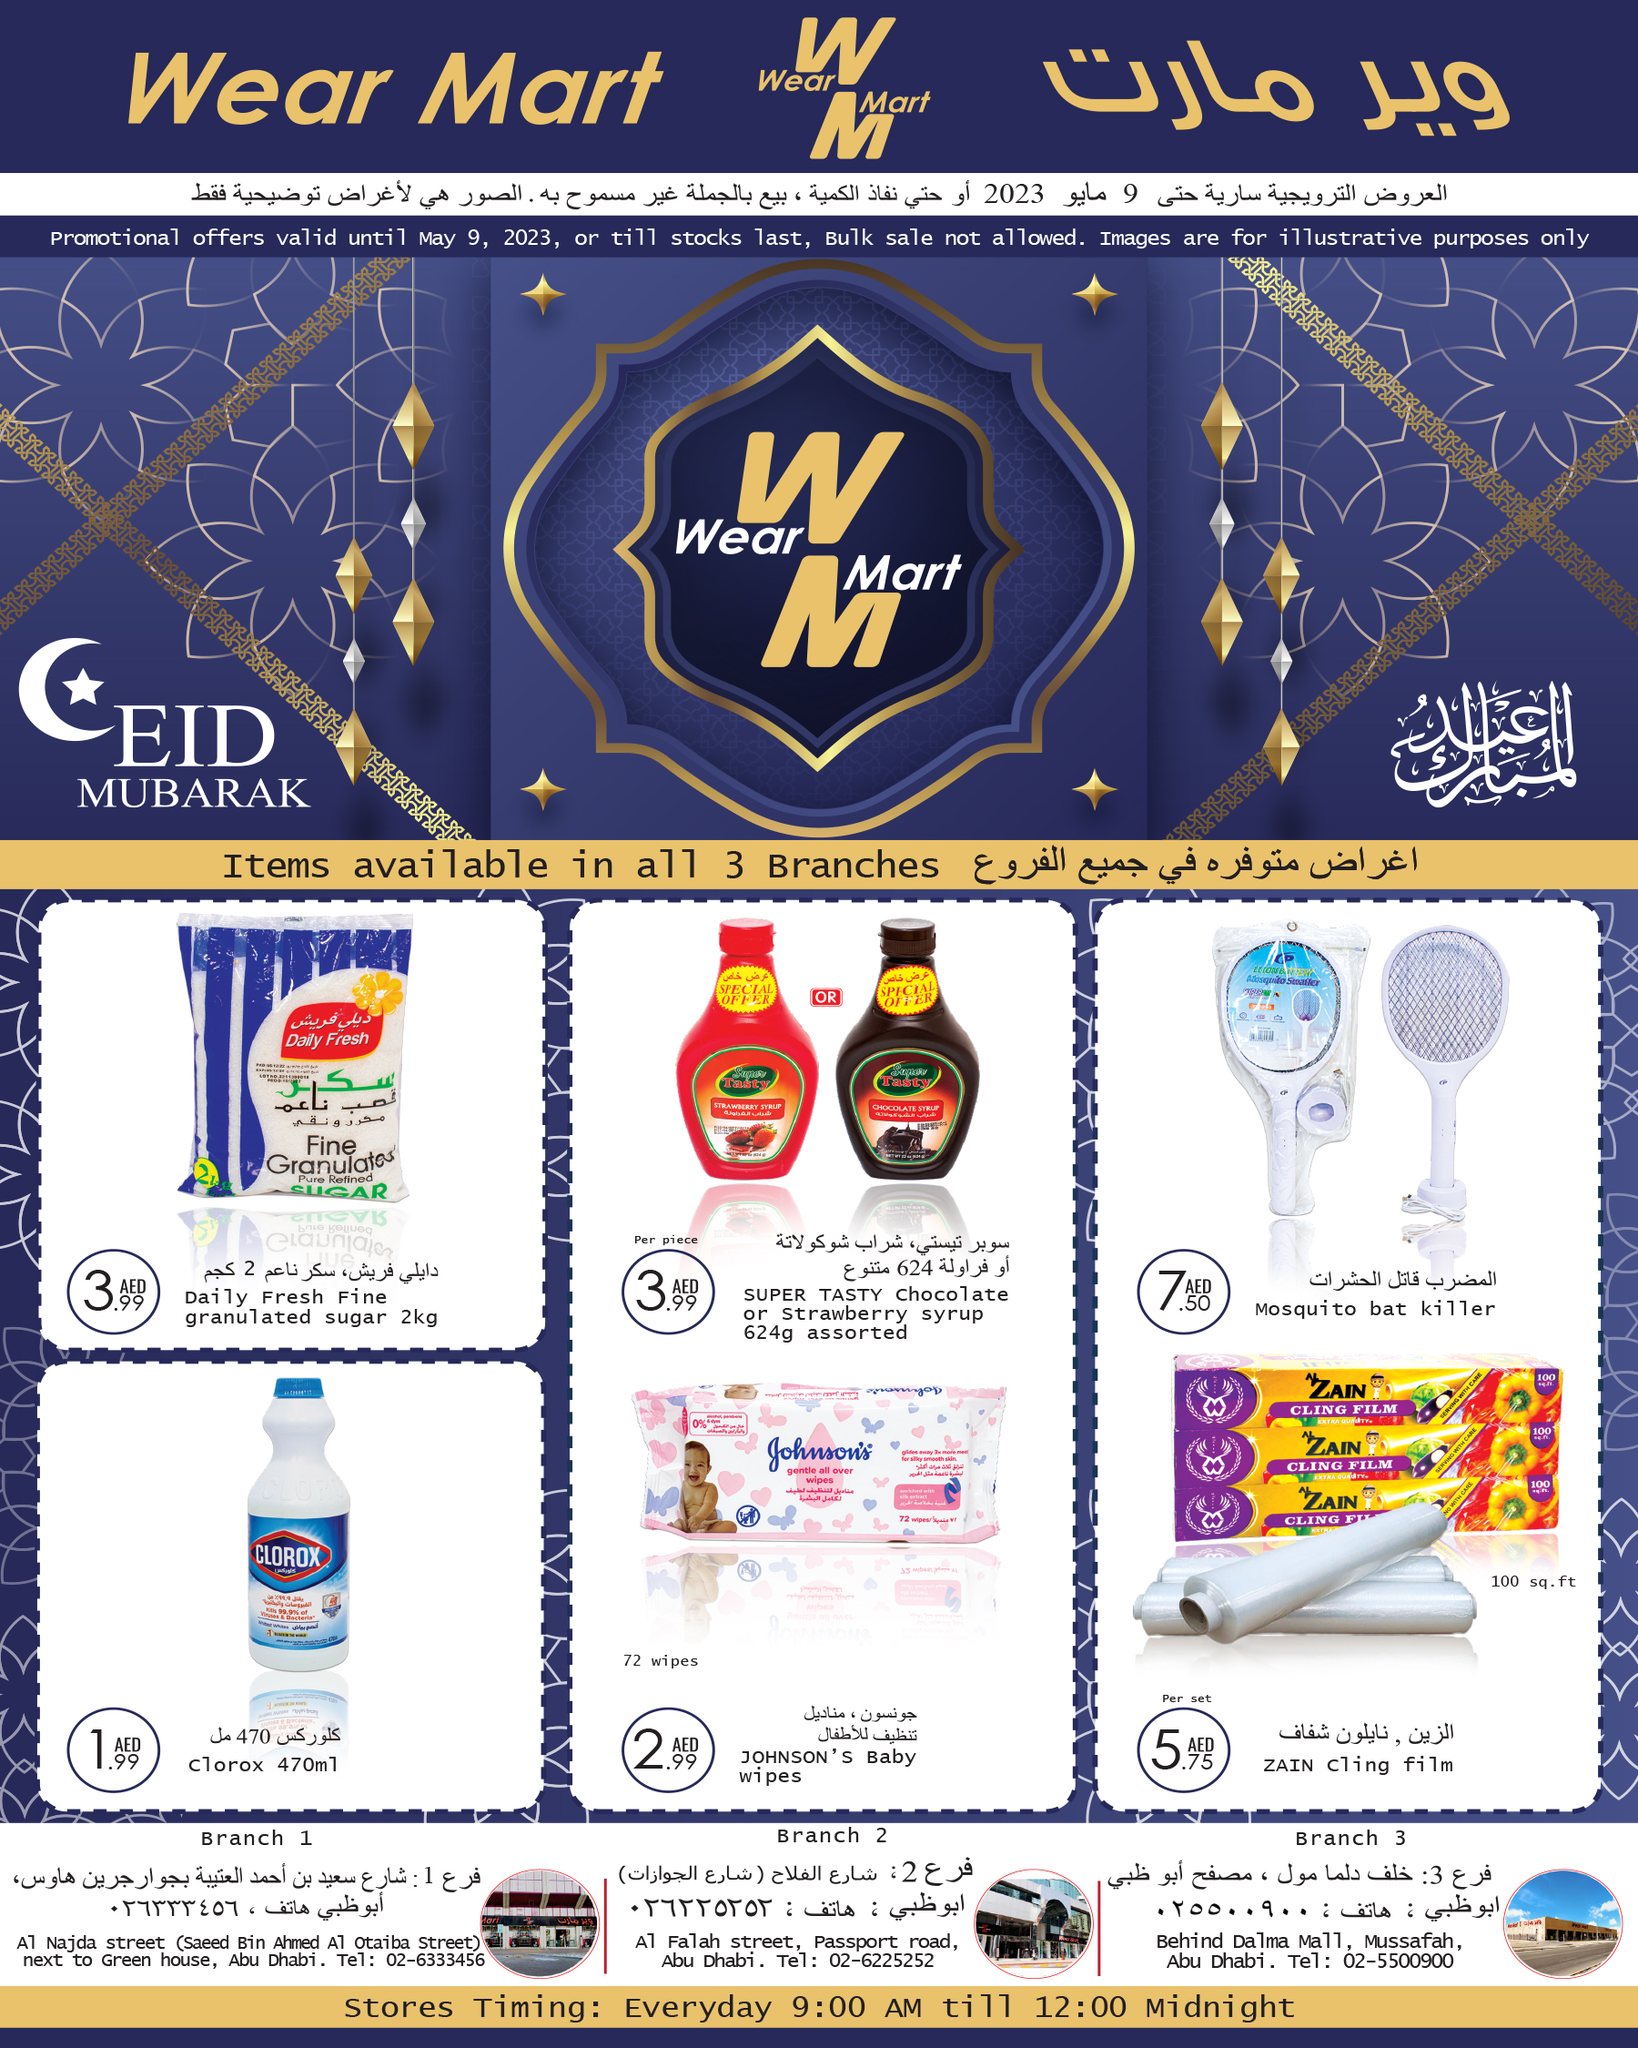 WEAR MART ABU DHABI GREAT OFFERS AND DEALS TILL 09-05-2023